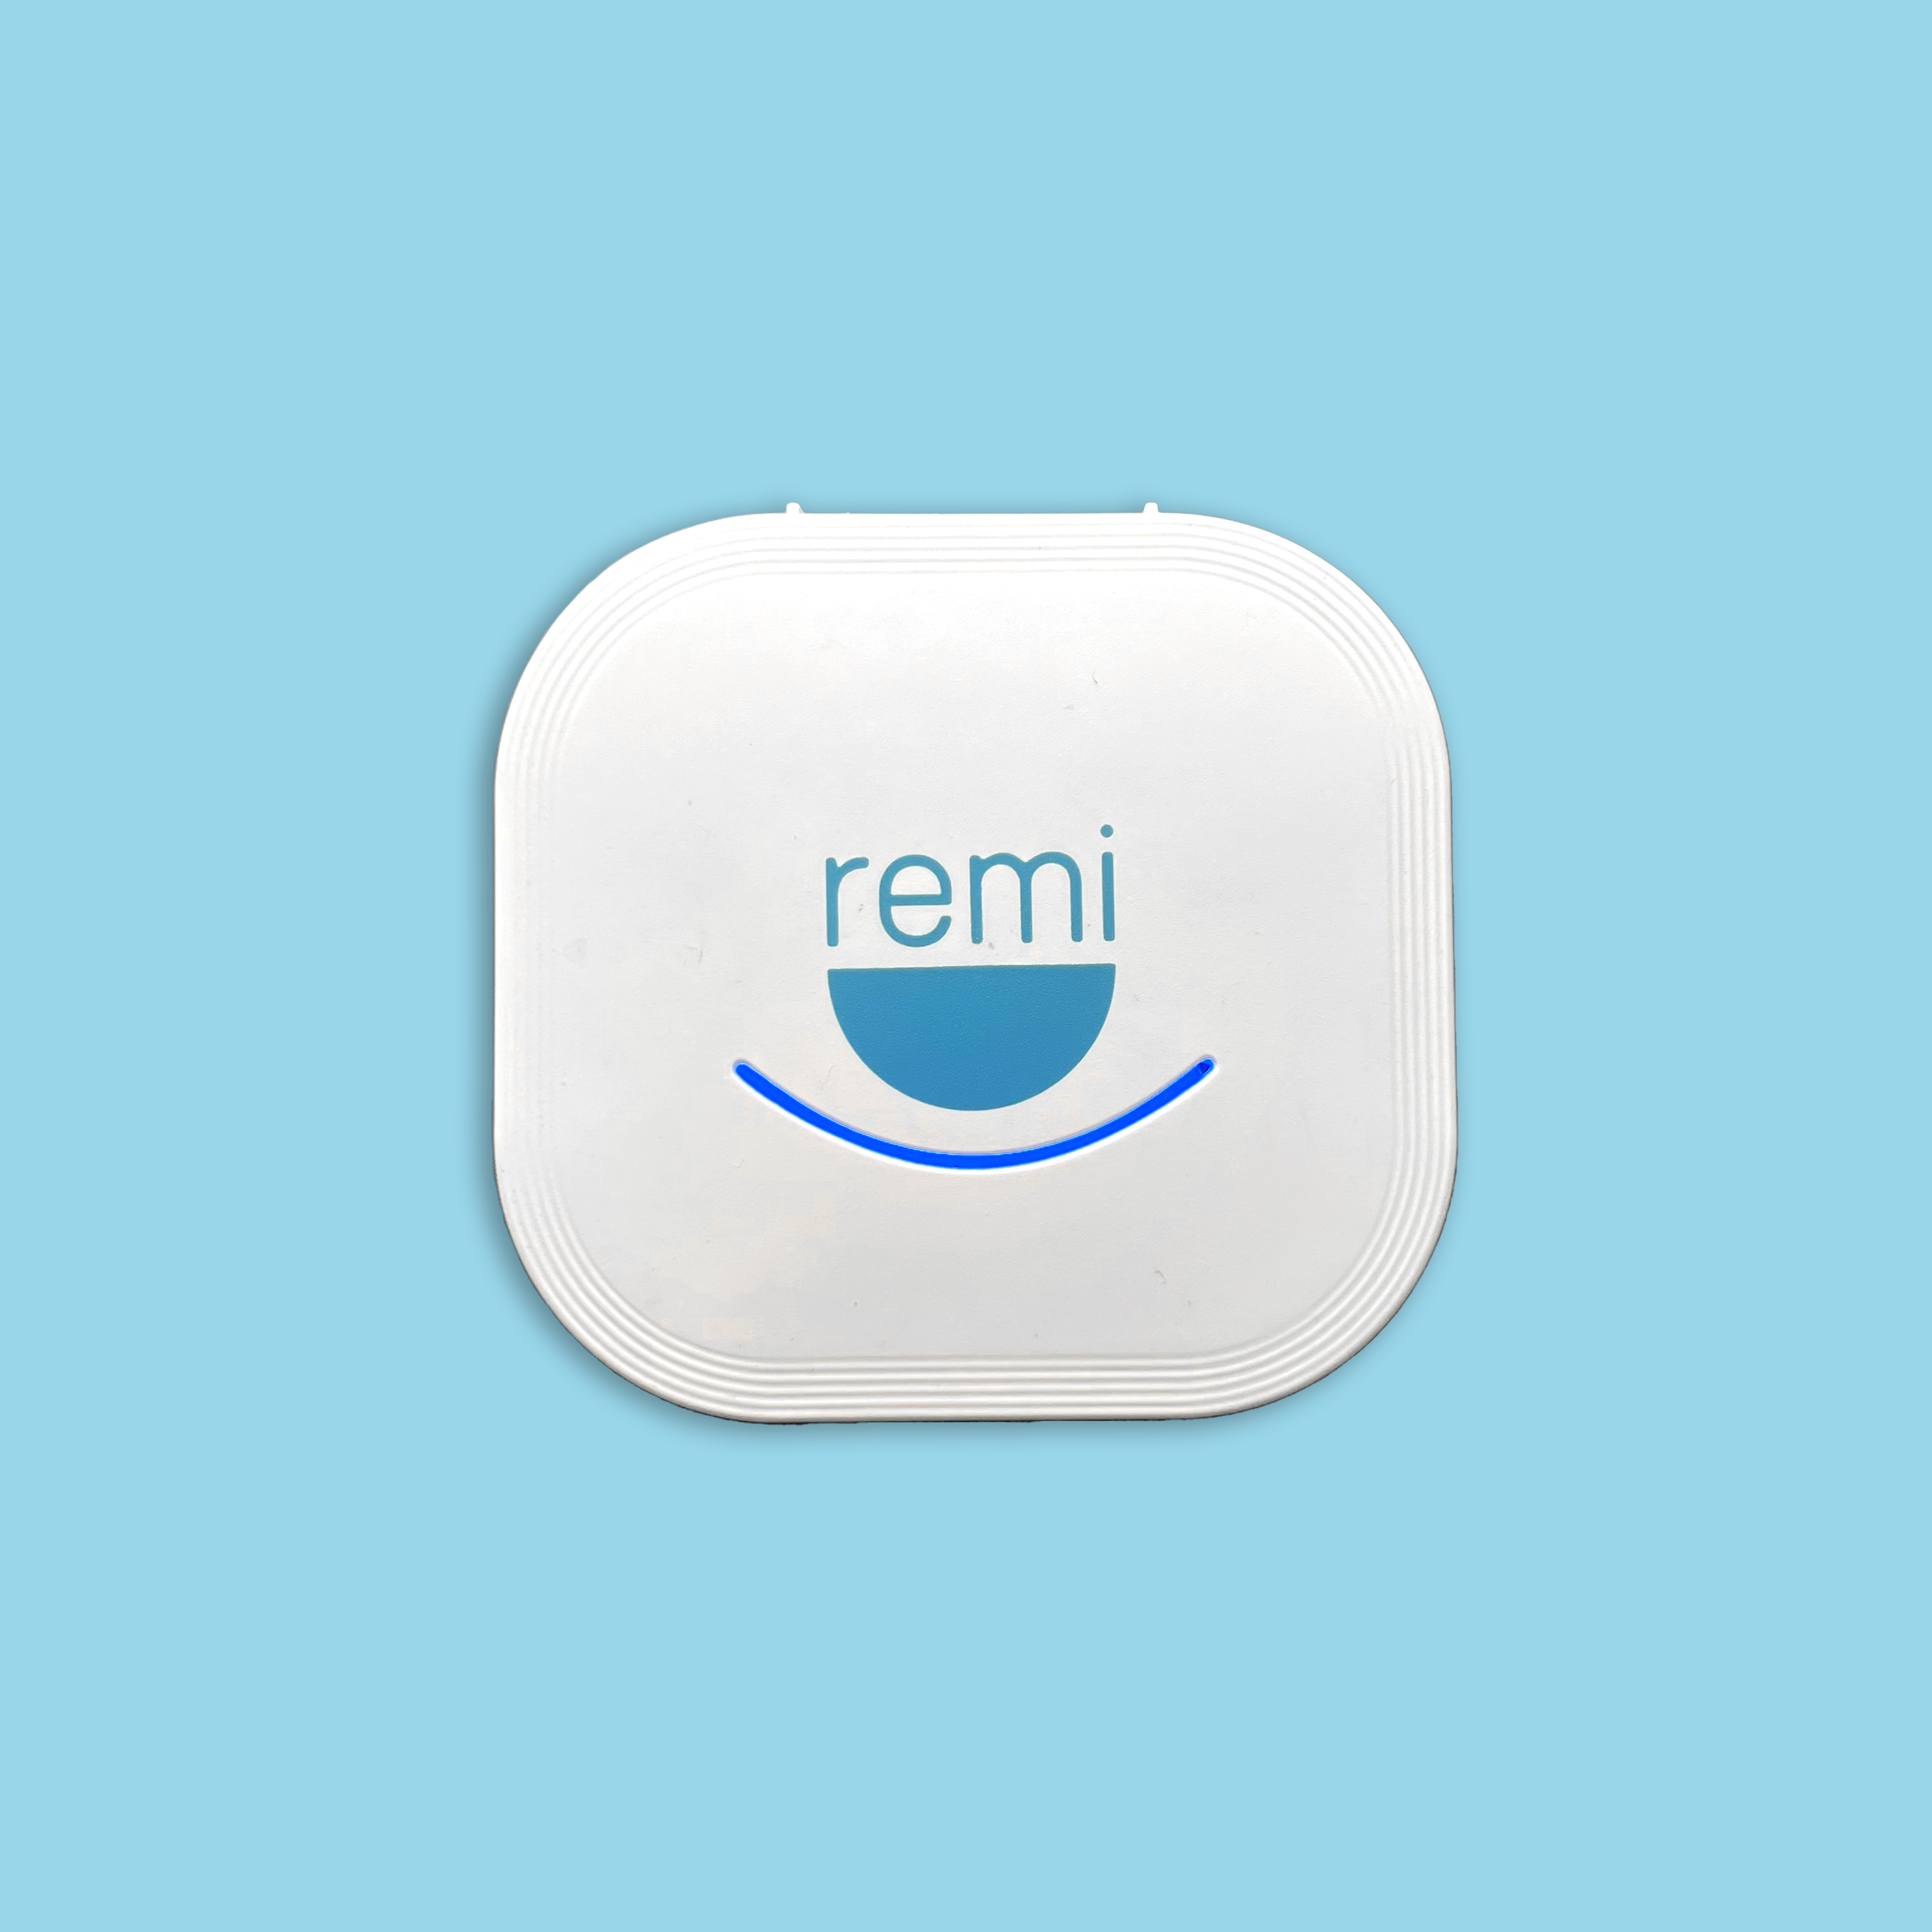 A white square device with rounded corners on a blue background. The device, part of the Ultimate Teeth Whitening Bundle, features the logo "remi" above a blue semicircle, emphasizing its focus on advanced oral hygiene and teeth whitening.